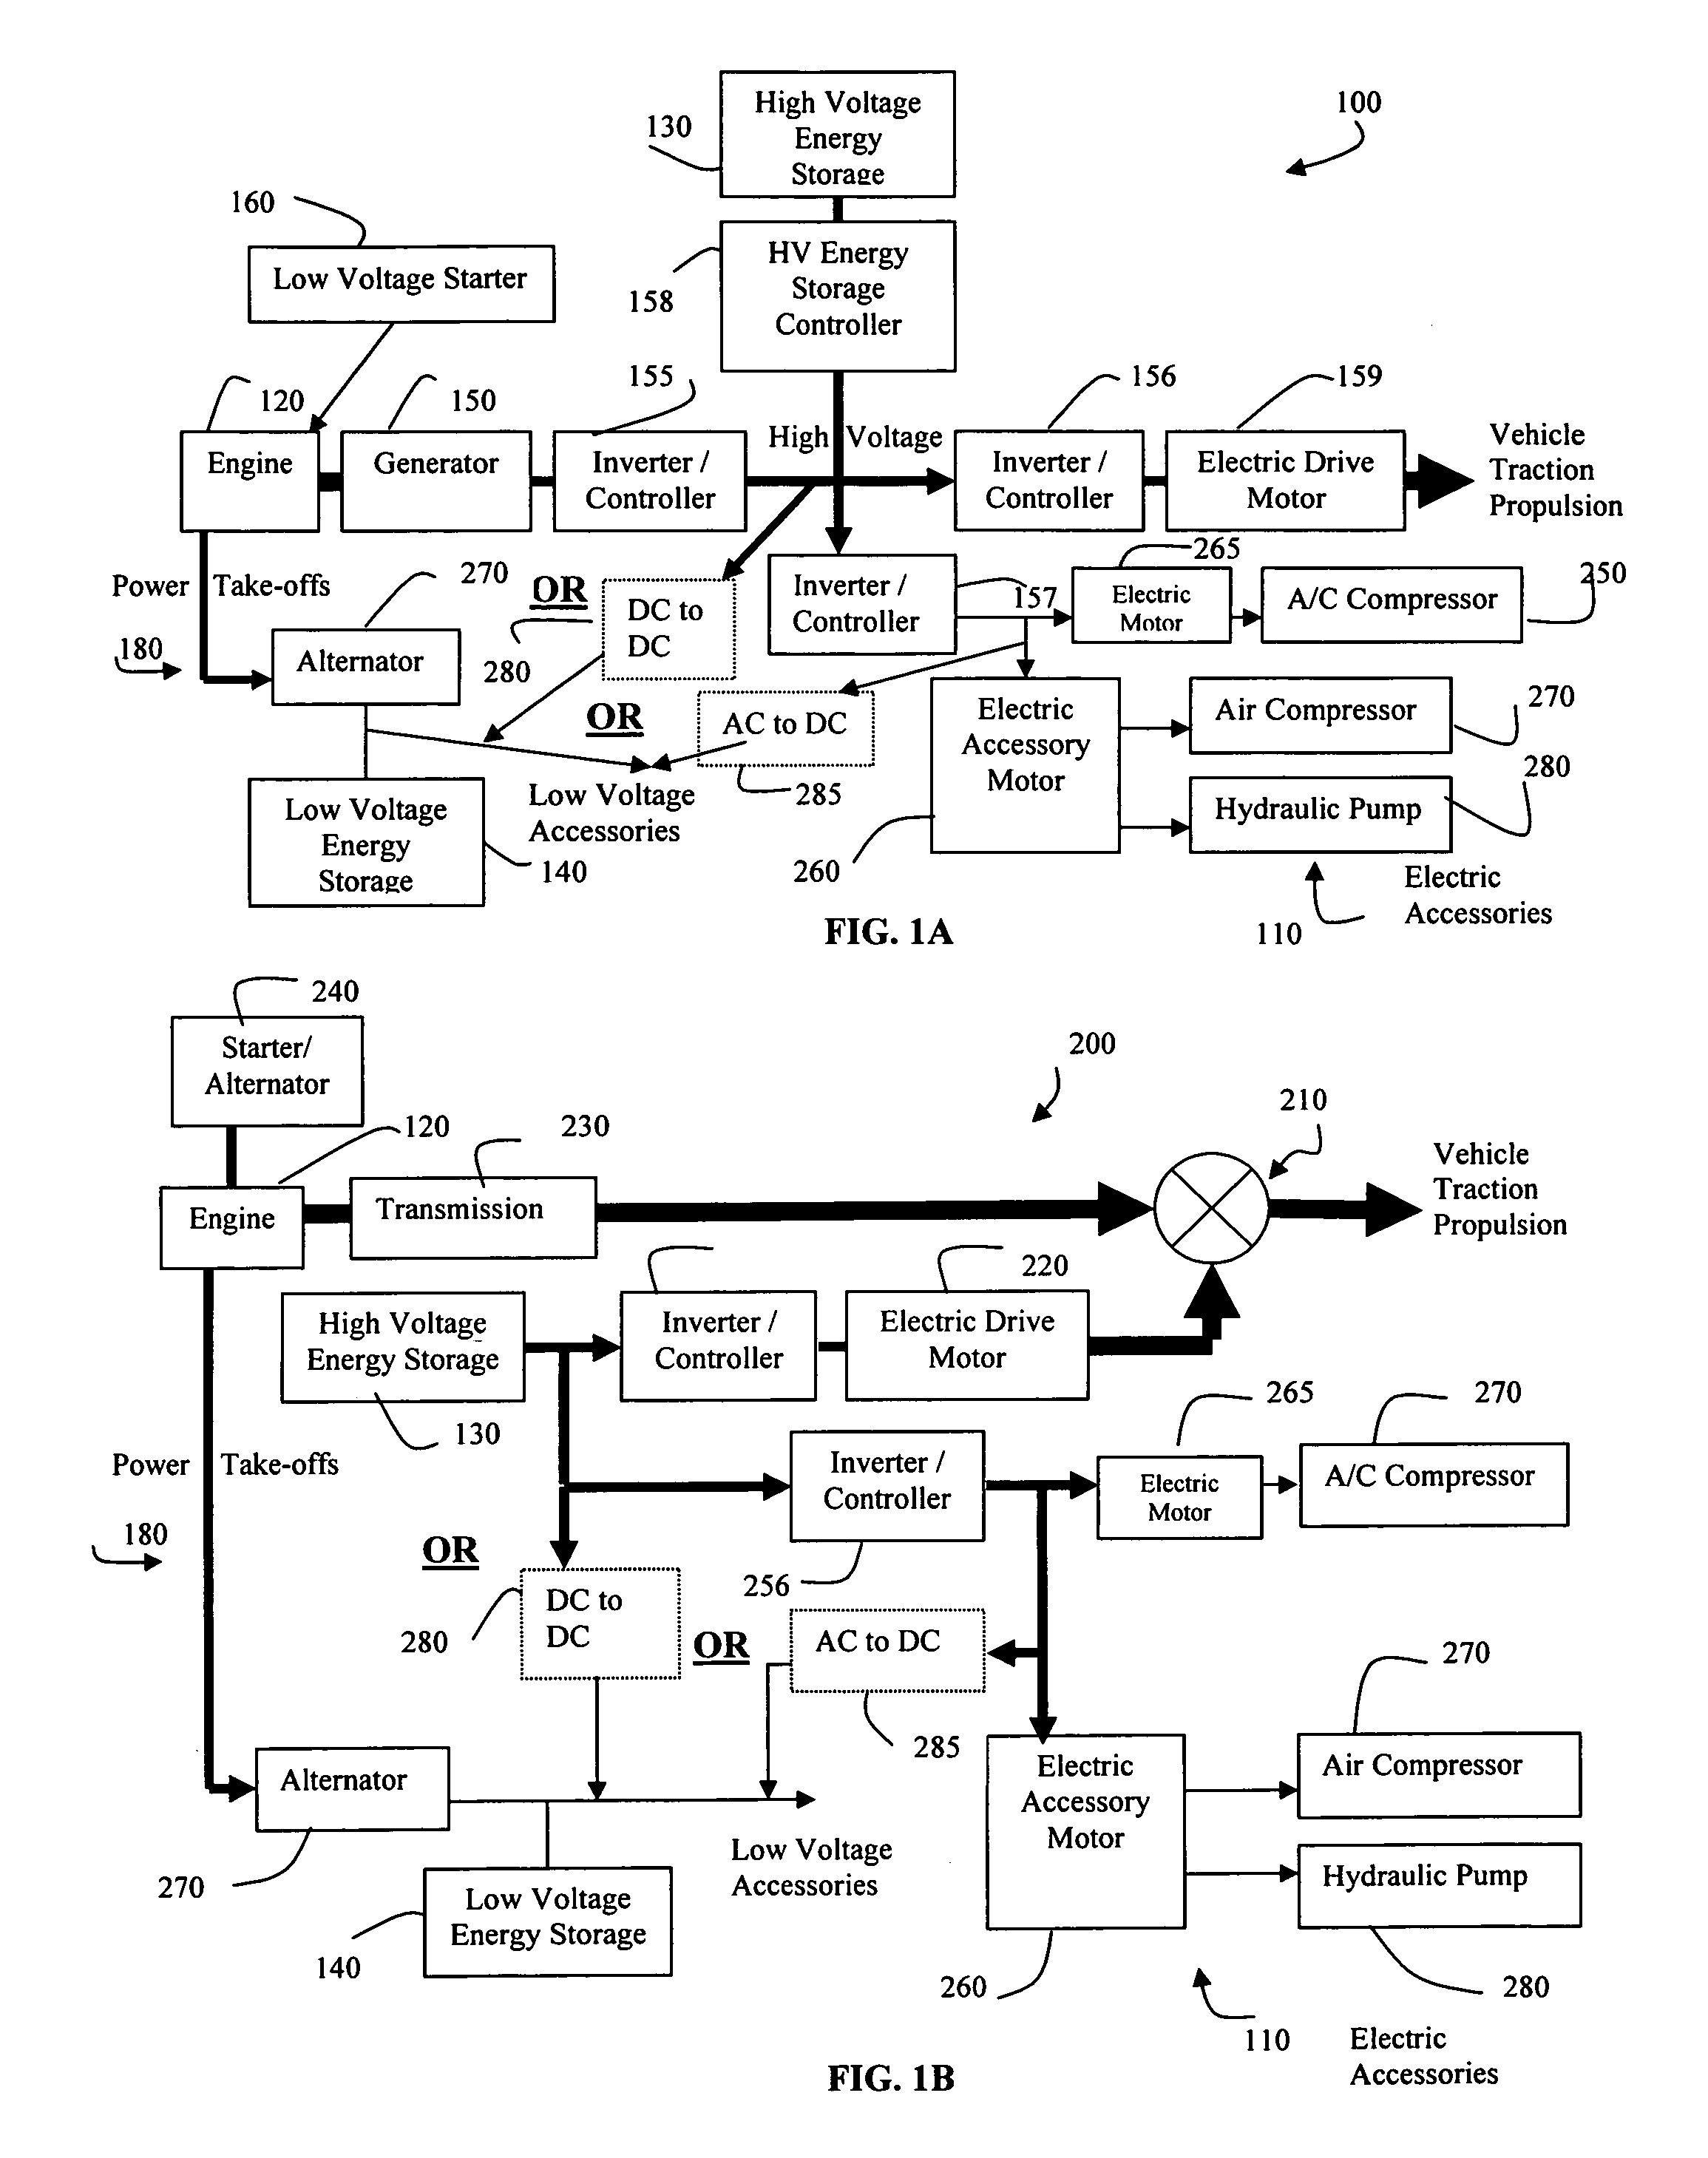 Method of controlling engine stop-start operation for heavy-duty hybrid-electric and hybrid-hydraulic vehicles